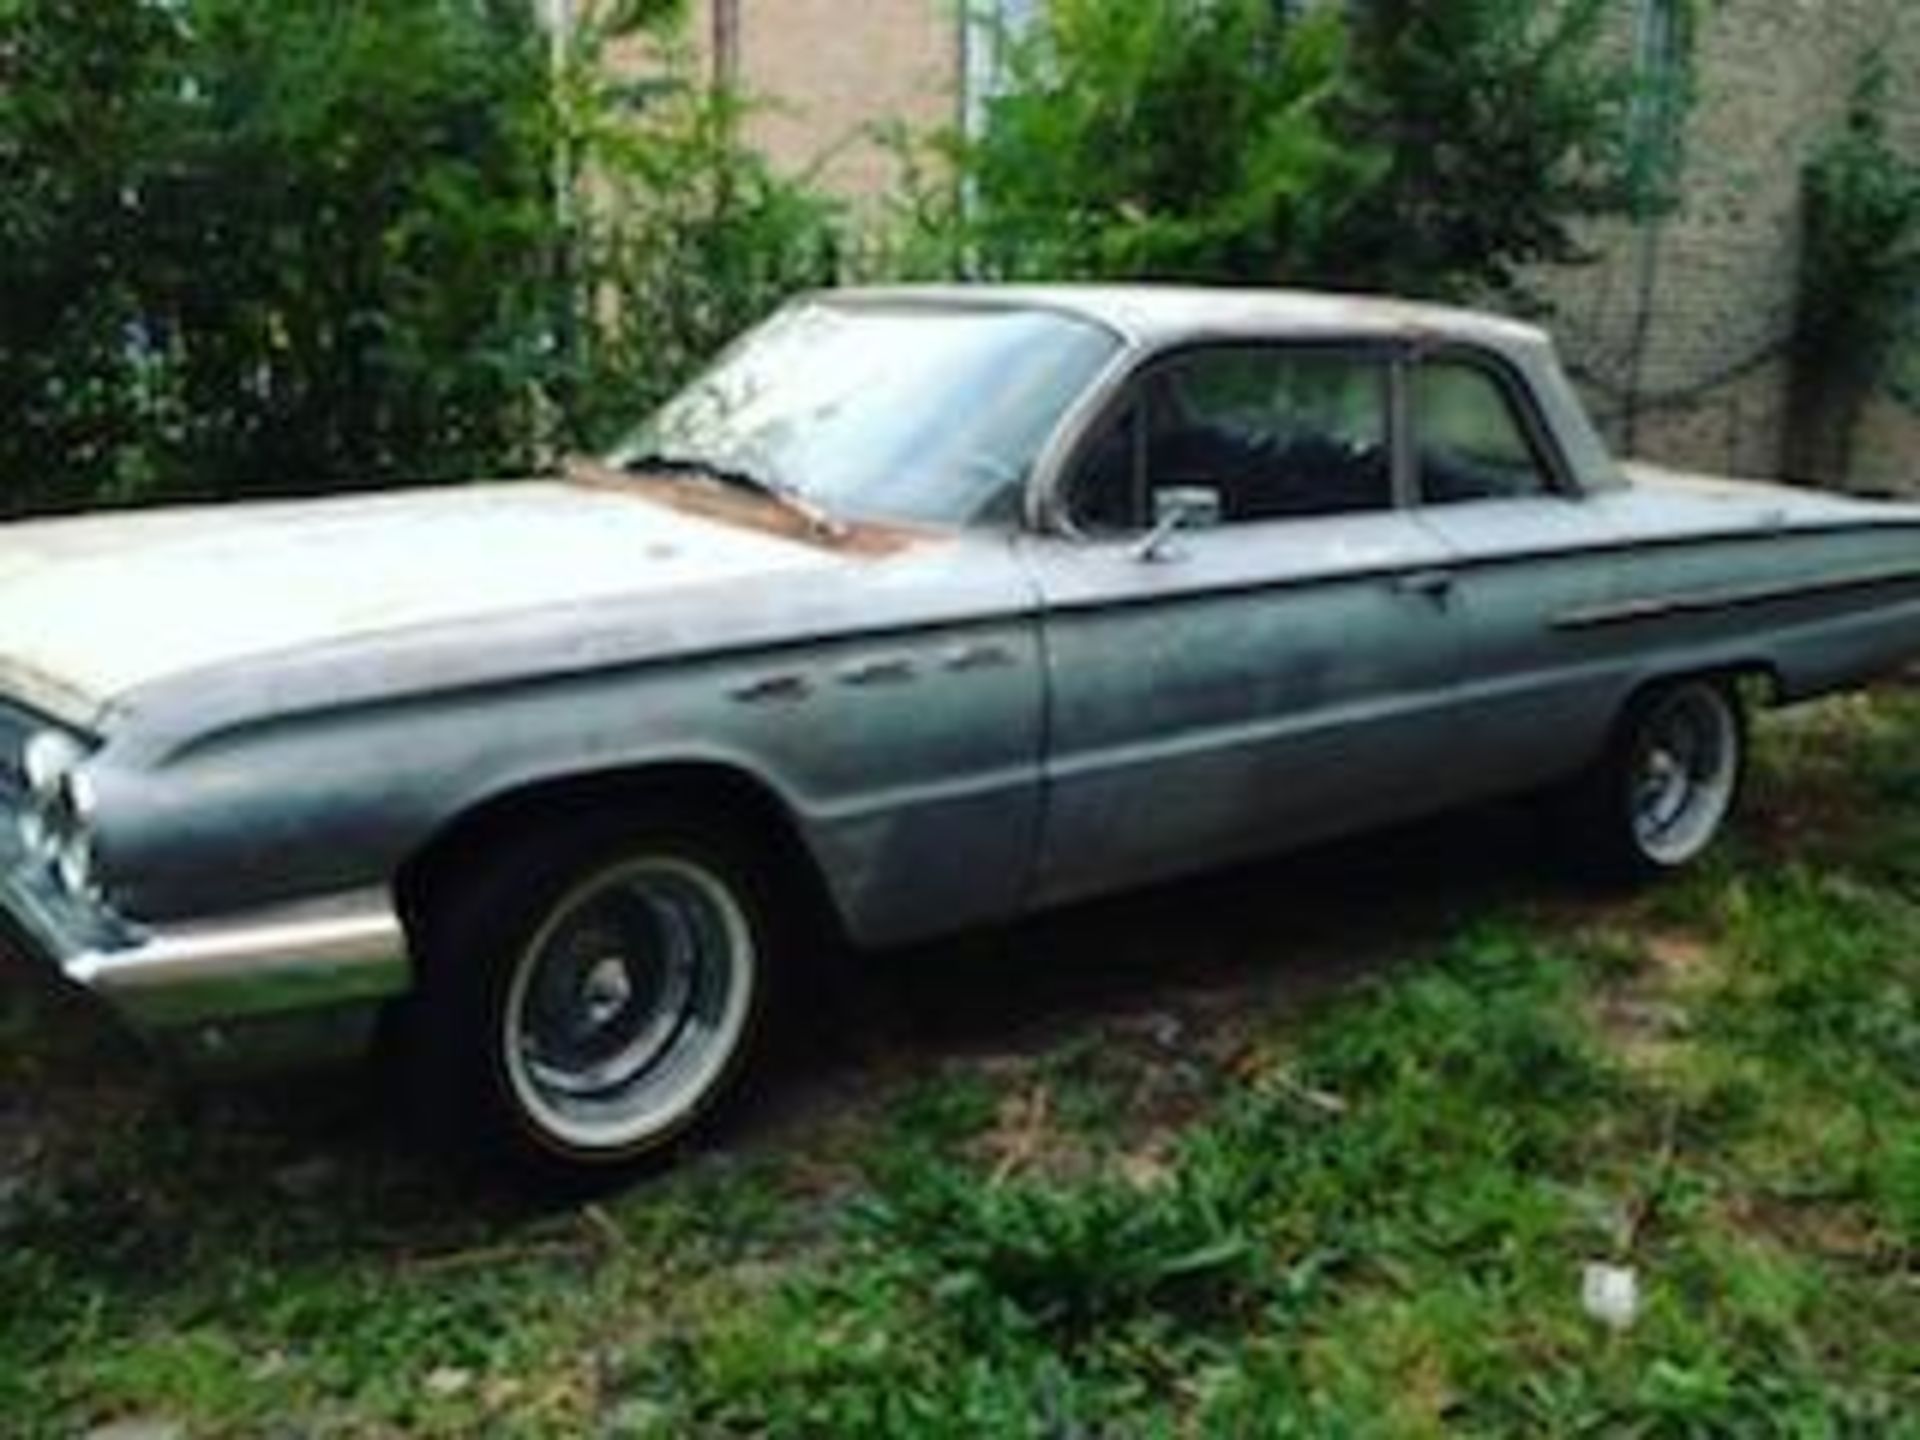 Year: 1962 Make: Buick Model: LeSabre Body Type: Coupe Engine Type: 401 Nailhead Engine Fuel Type: G